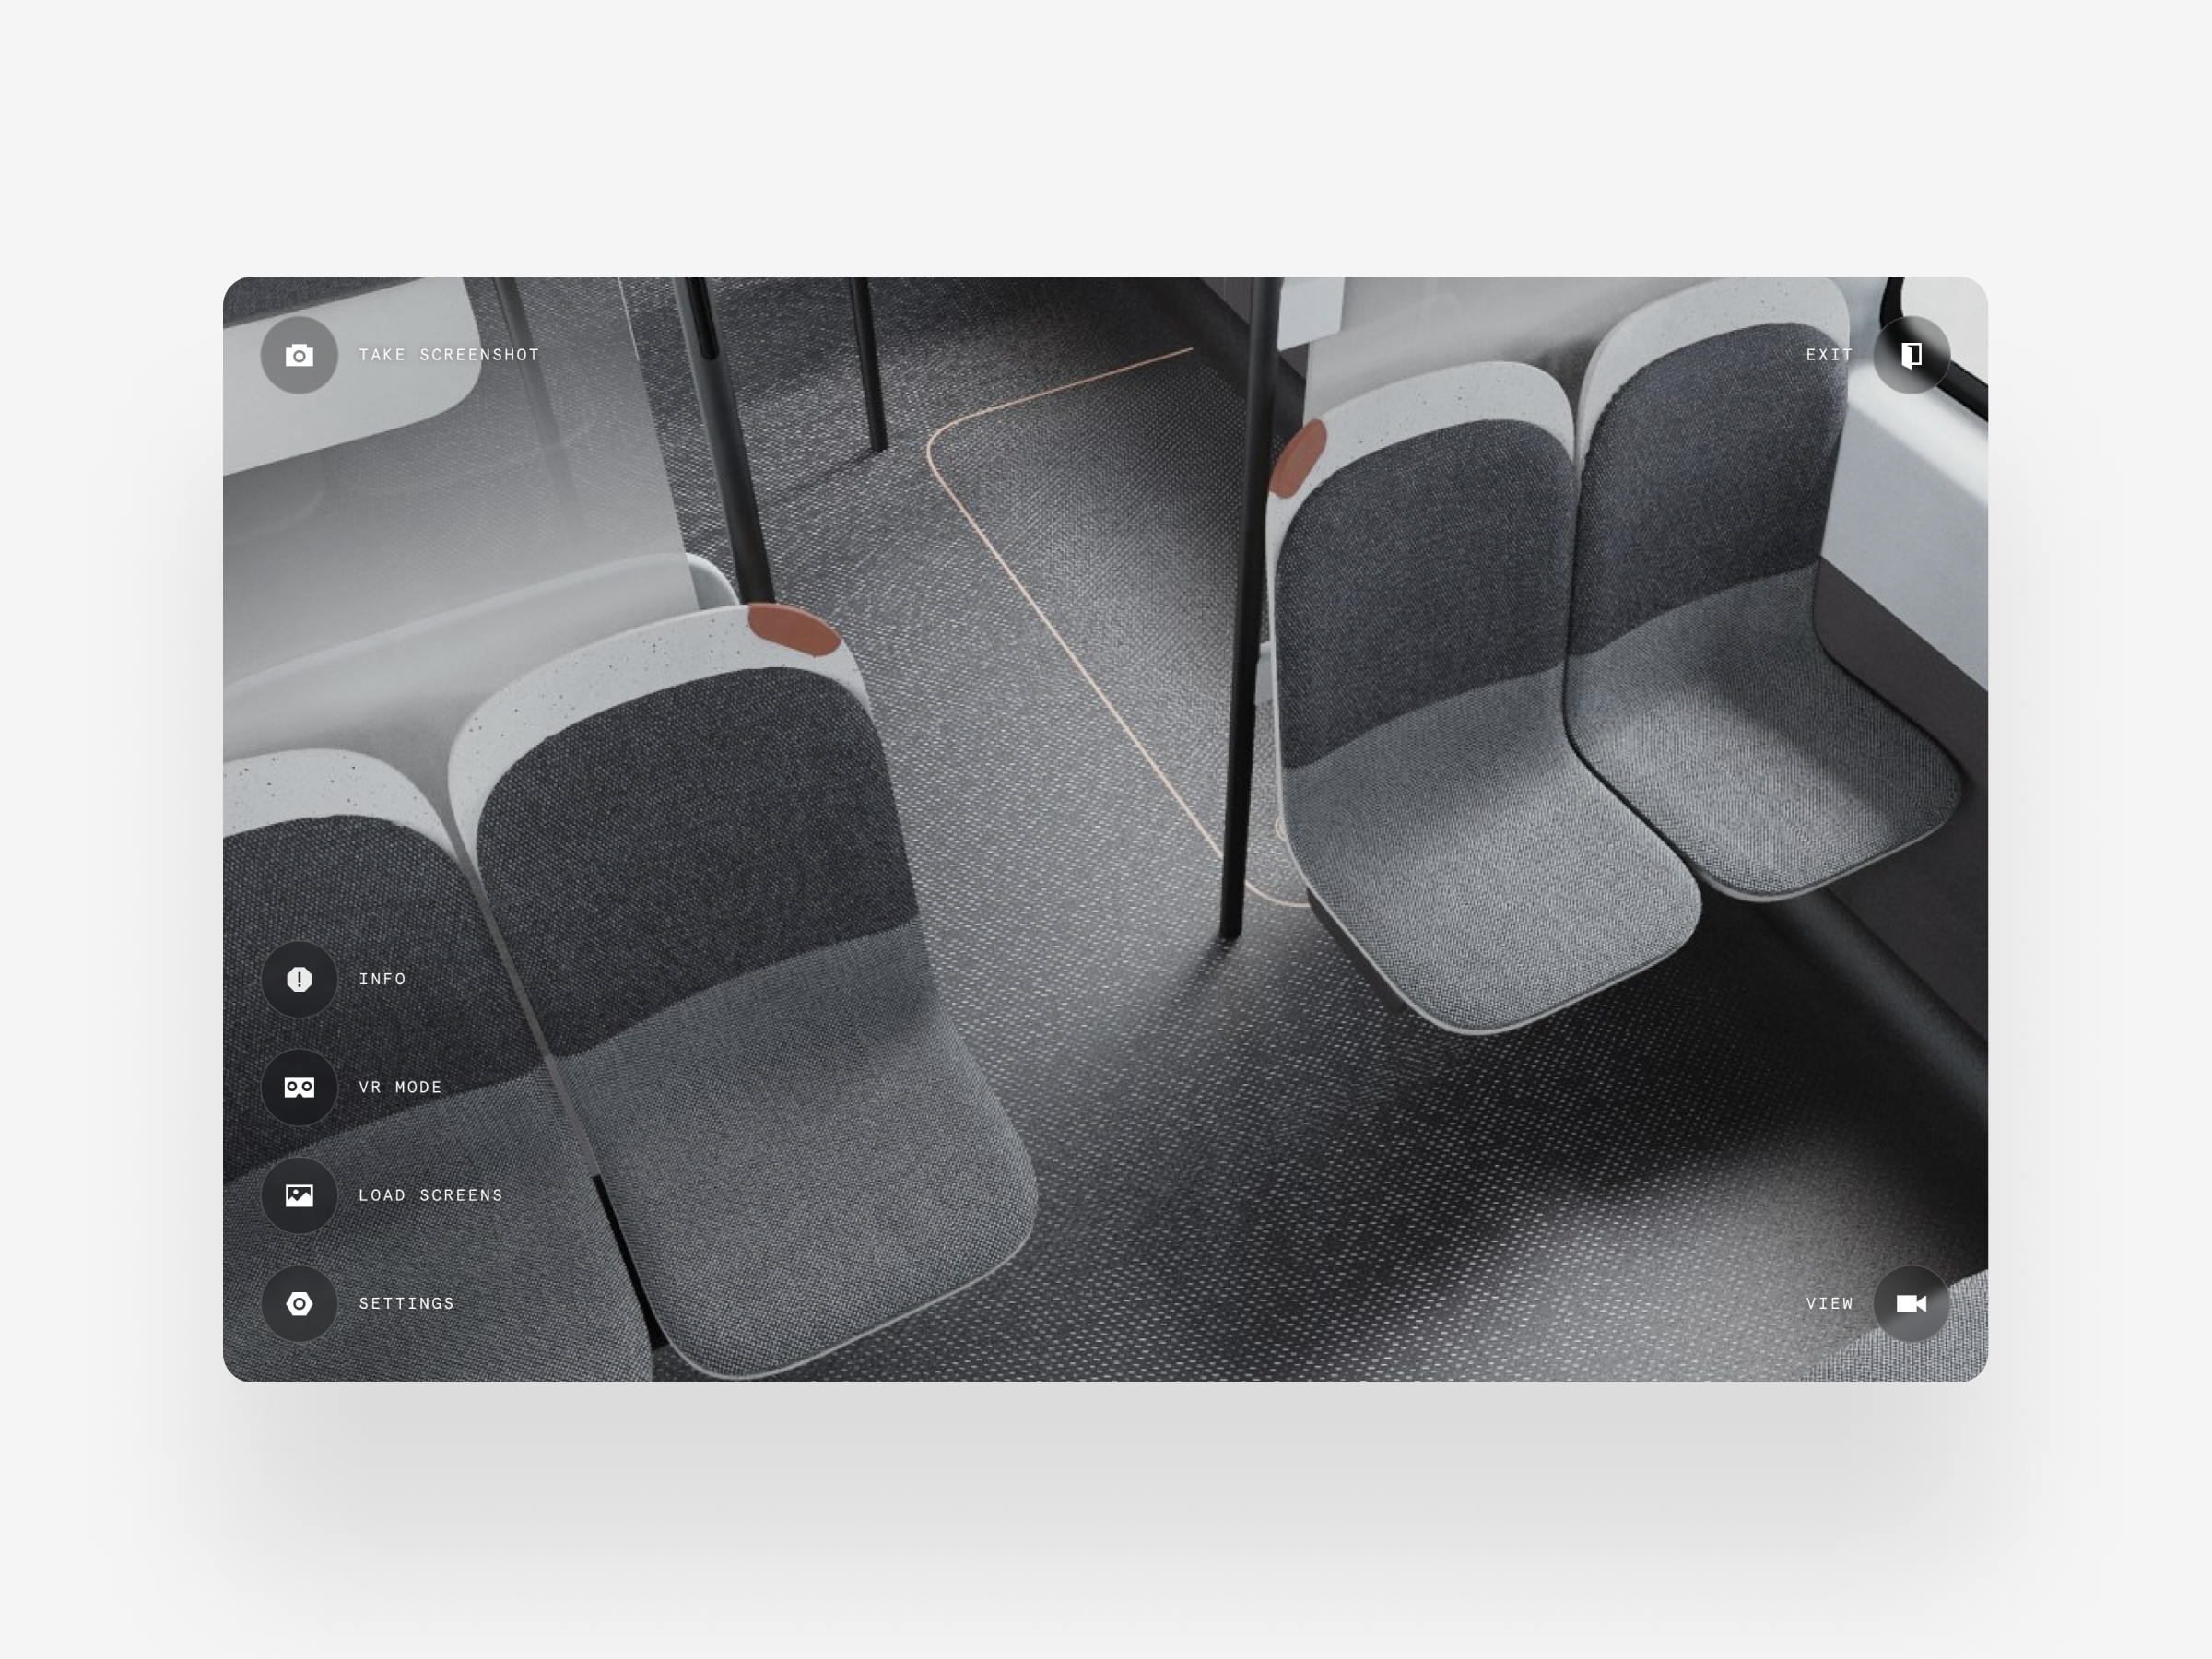 Main UI of the digital twin app for an electric bus.